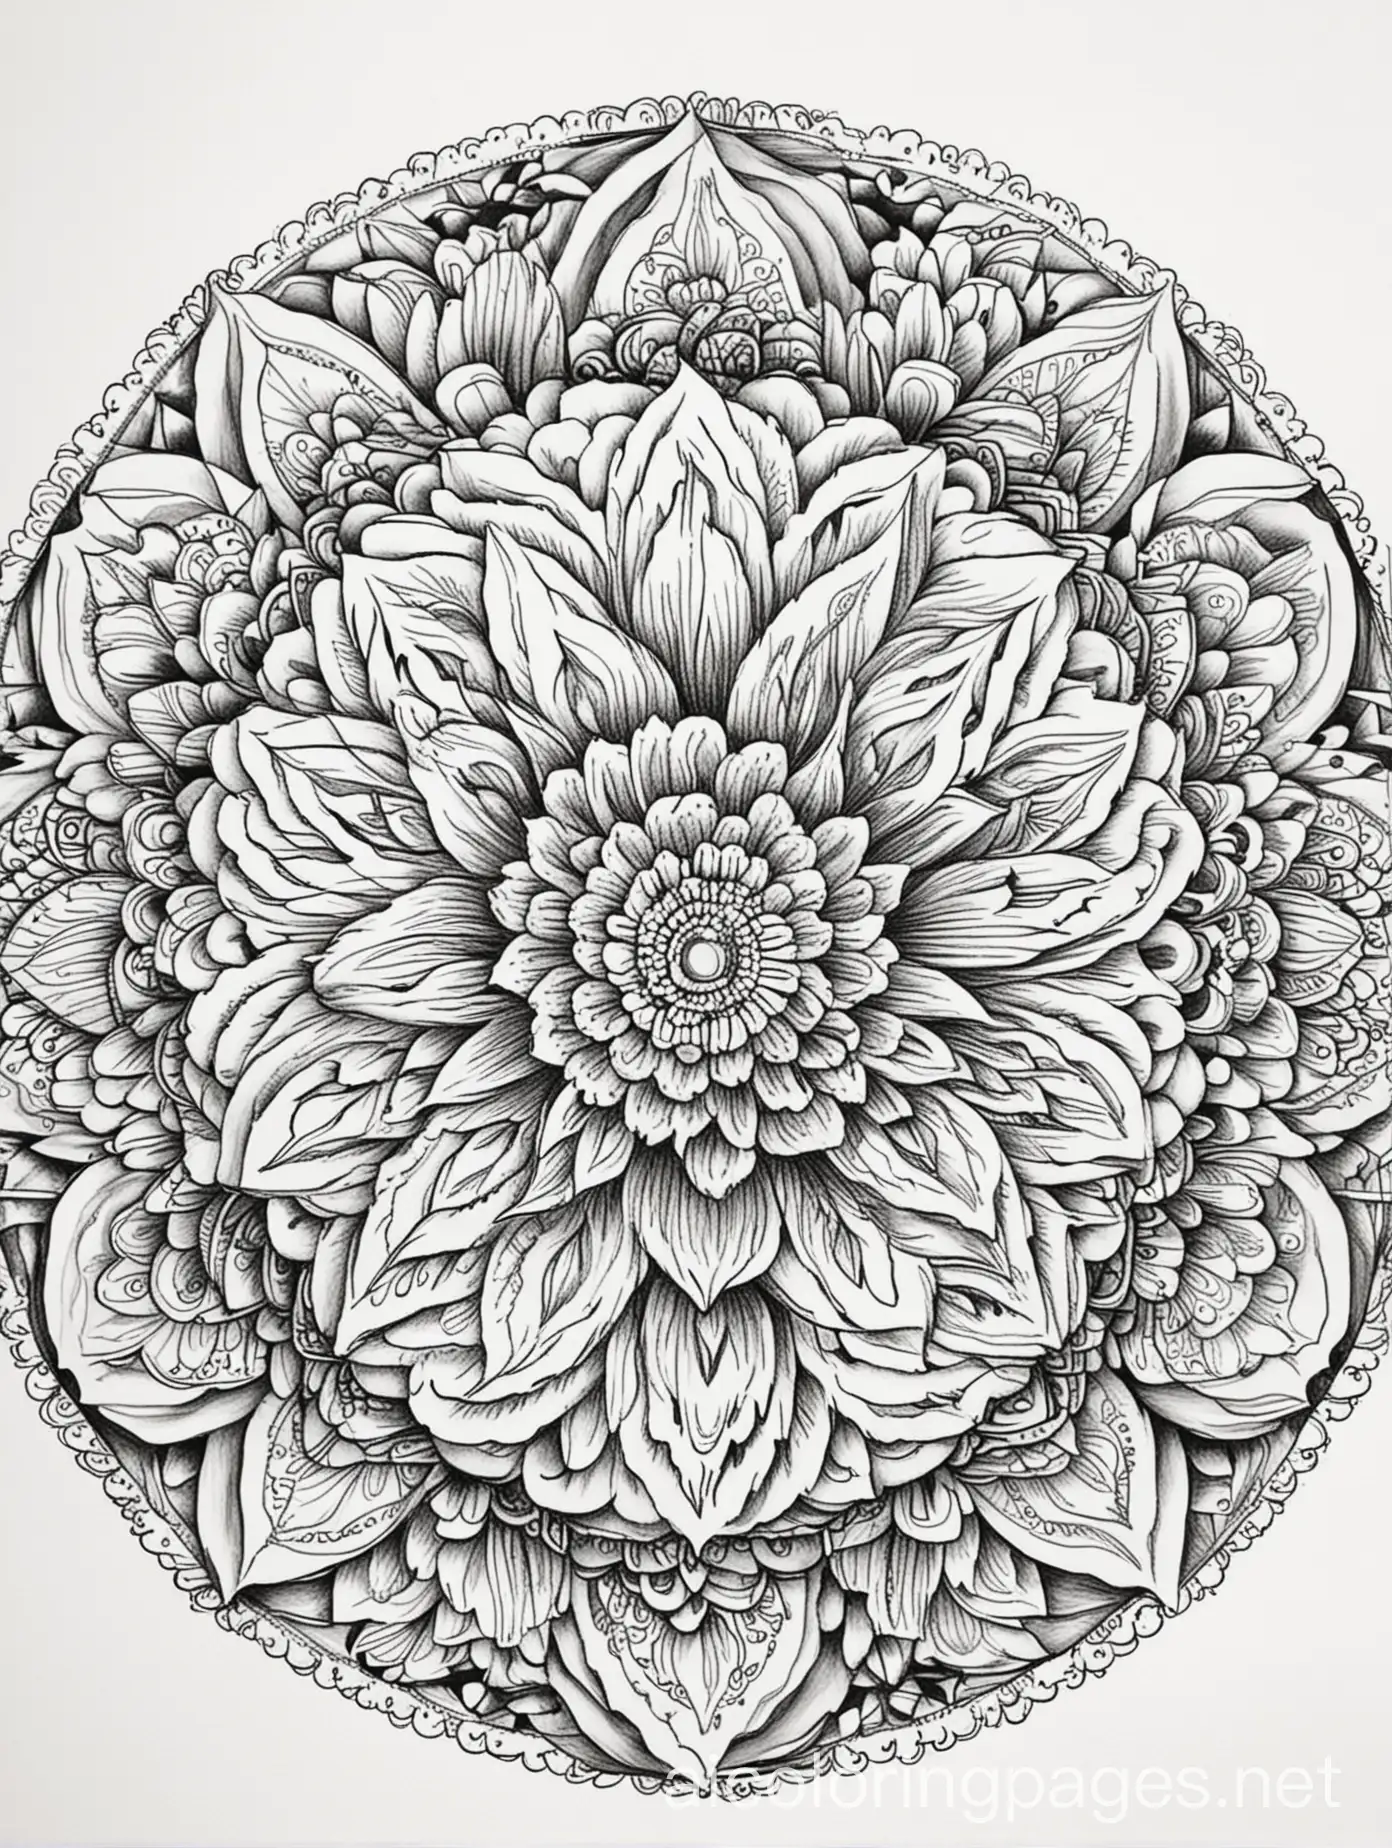 Peaceful-Mandala-Coloring-Page-Flower-Design-for-Relaxation